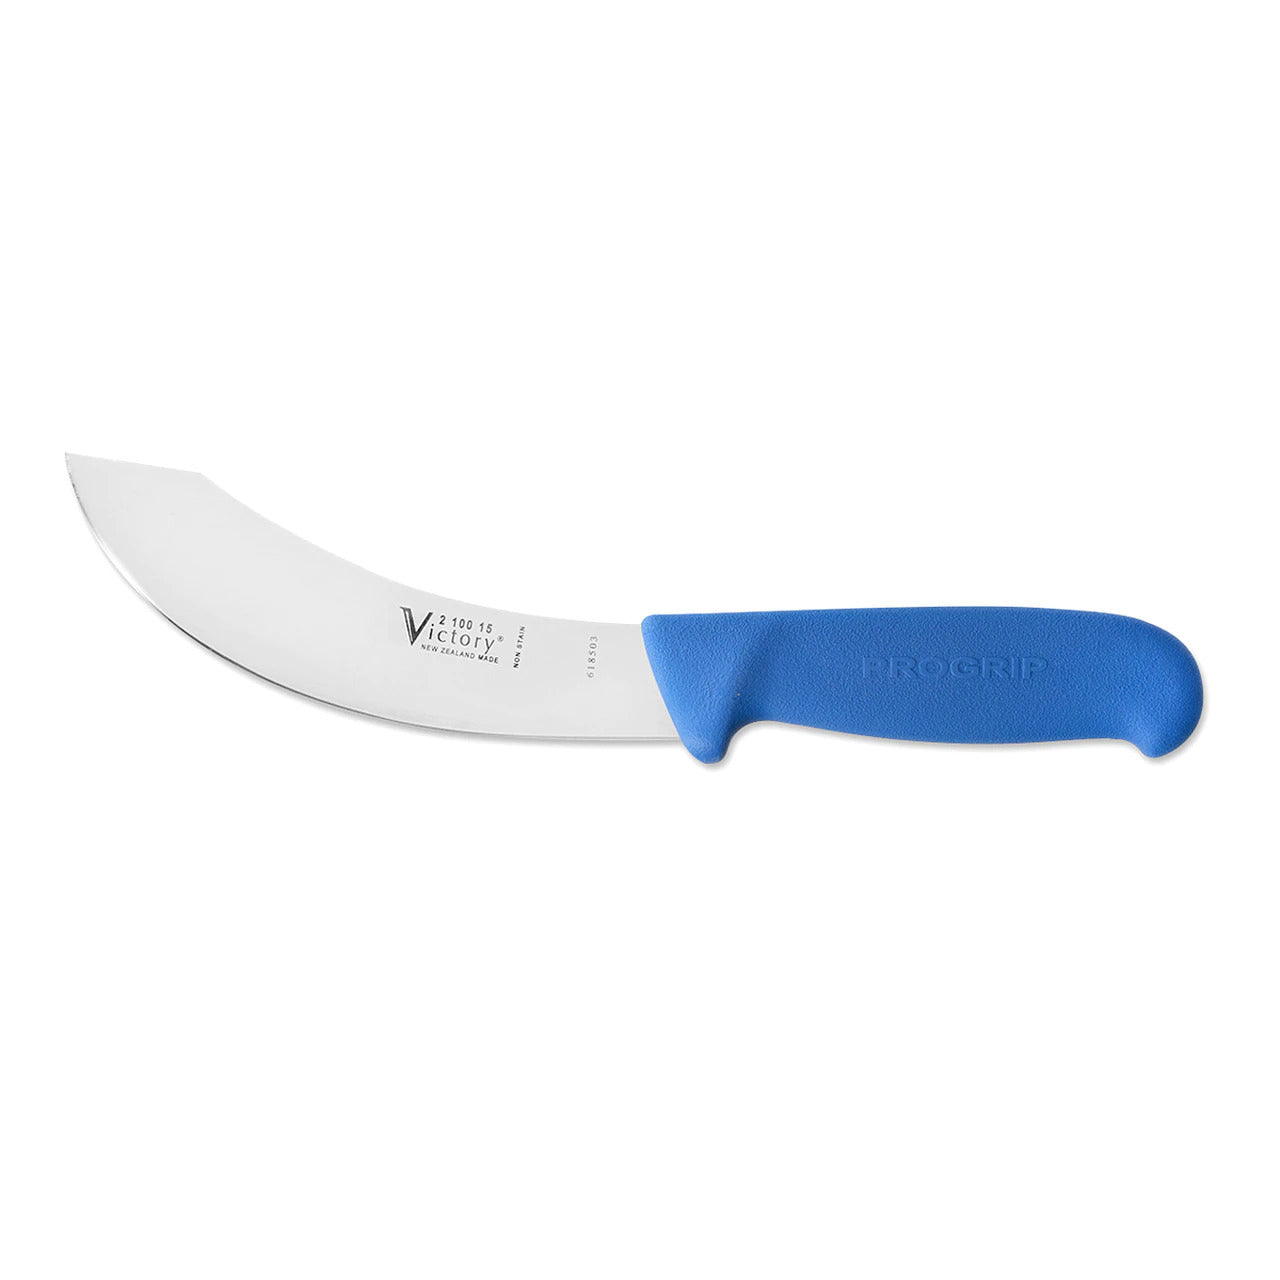 Victory Skinning Knife with Progrip Blue 15cm Hang Sell -  - Mansfield Hunting & Fishing - Products to prepare for Corona Virus